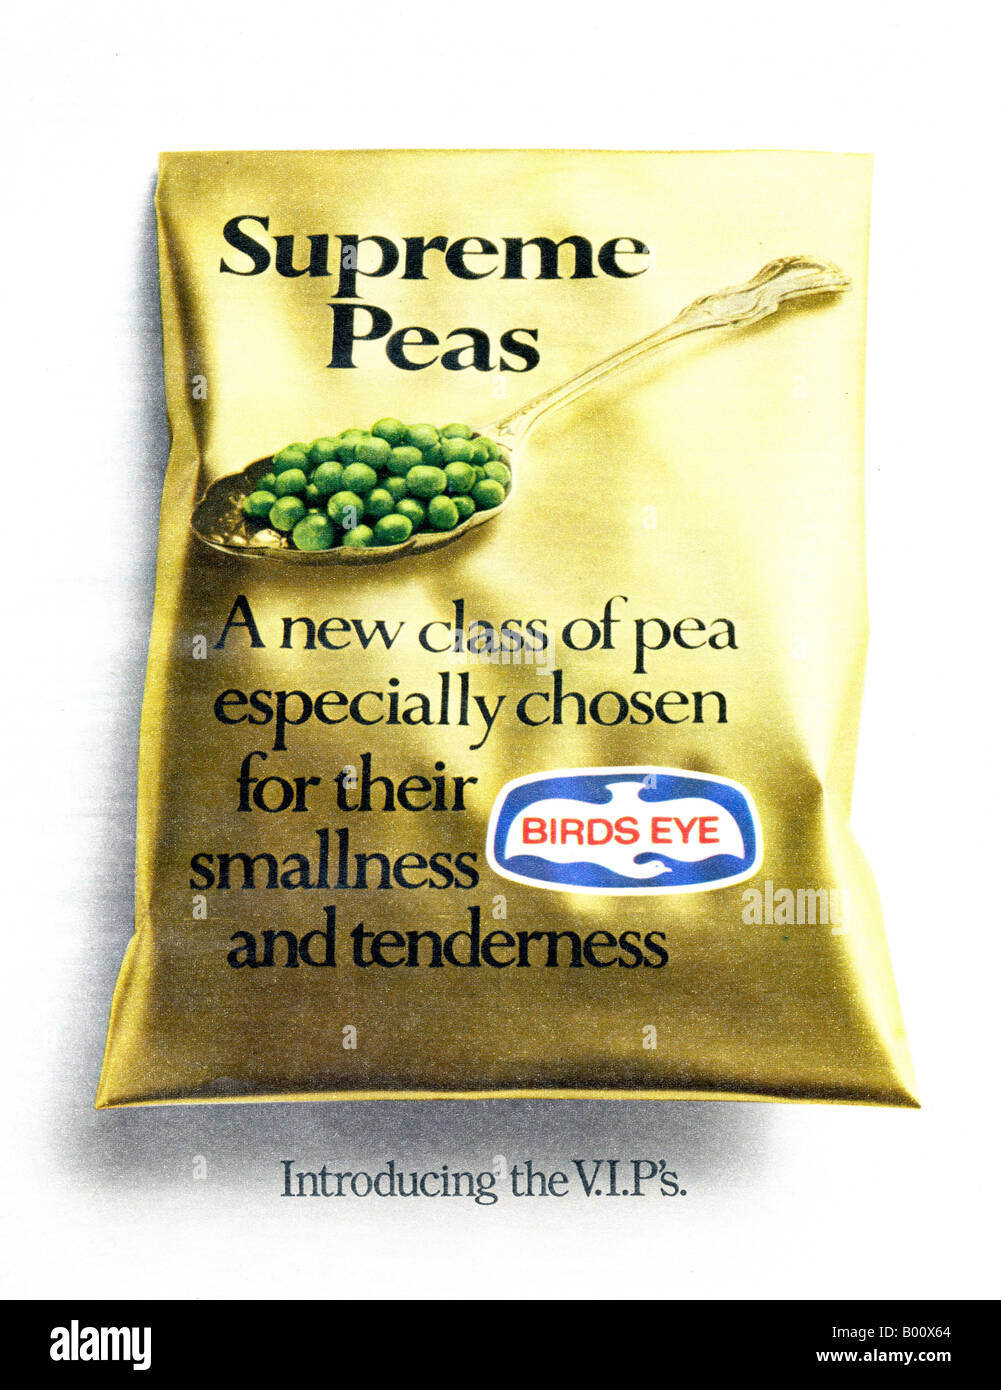 1970s magazine advertisement for Birds Eye Frozen Foods Supreme Peas      1973 FOR EDITORIAL USE ONLY Stock Photo